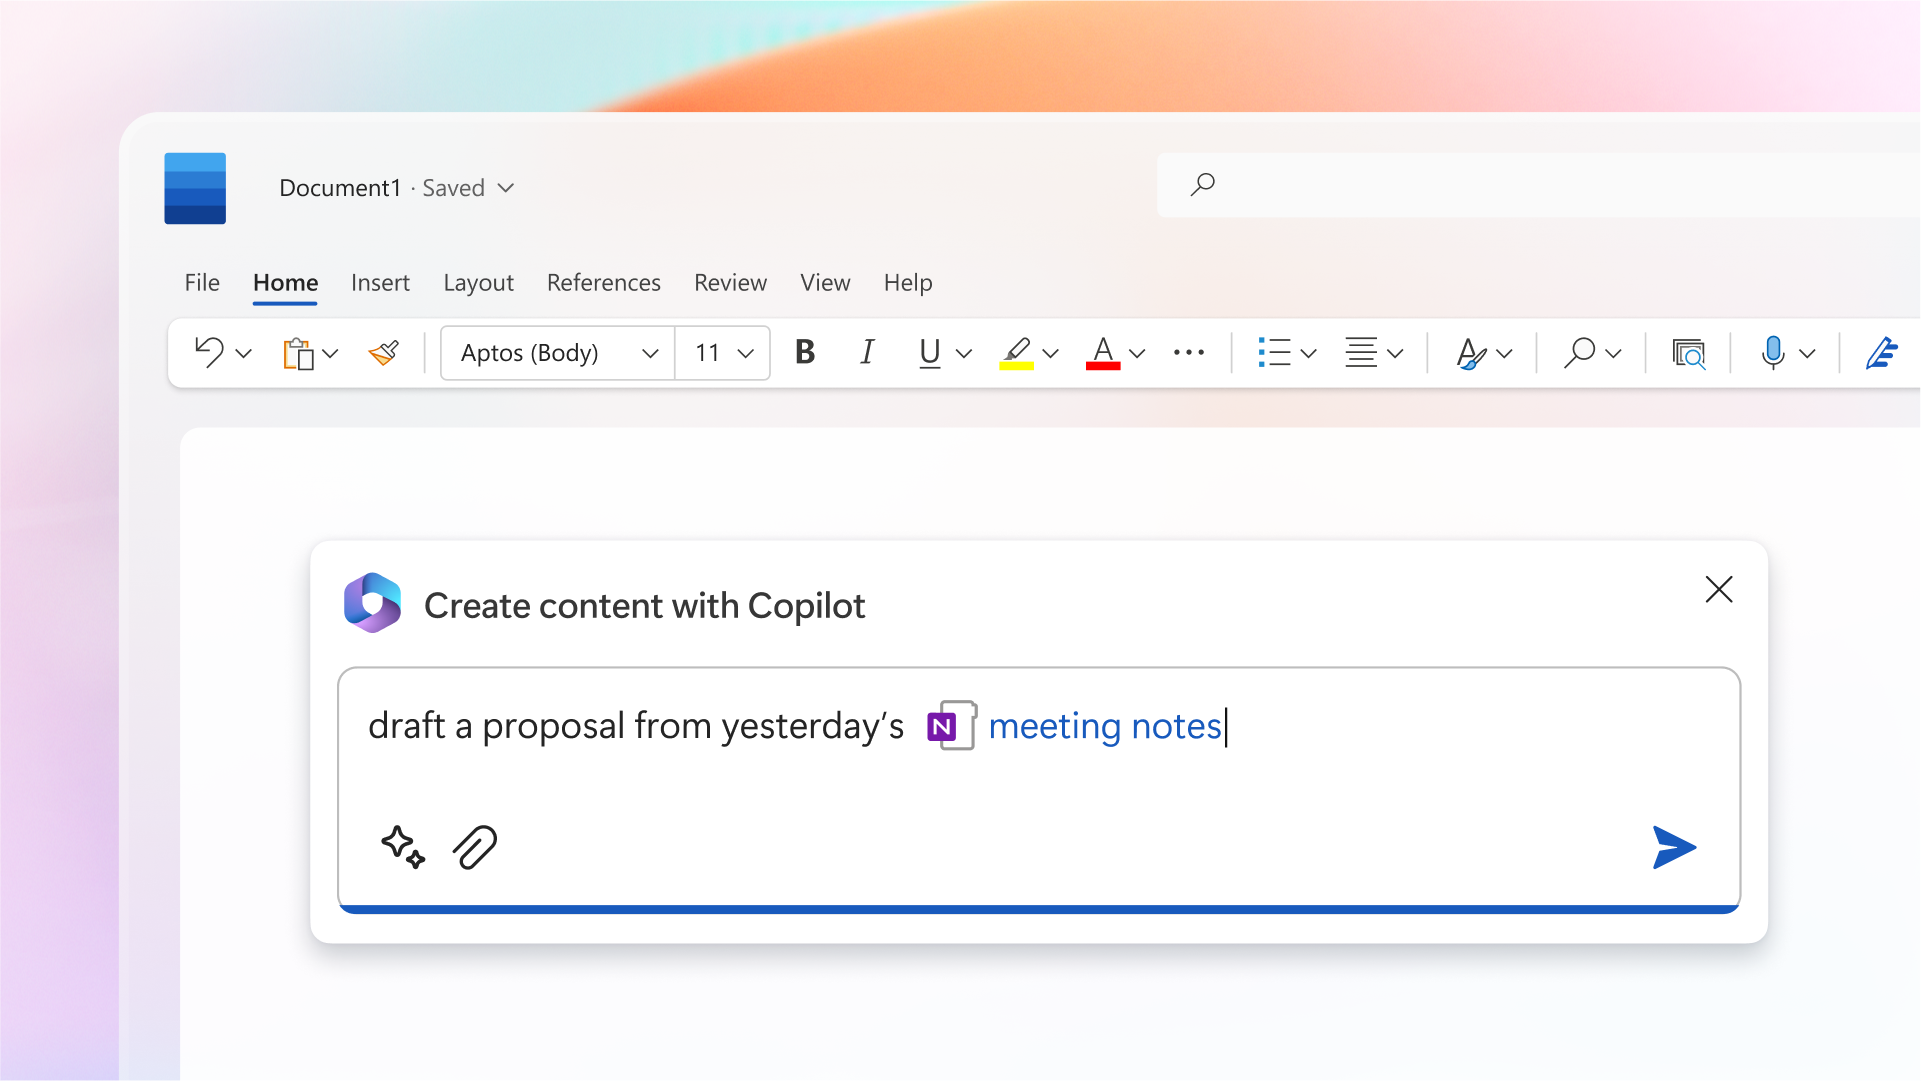 Image showing Microsoft Word with Copilot window open on pink background